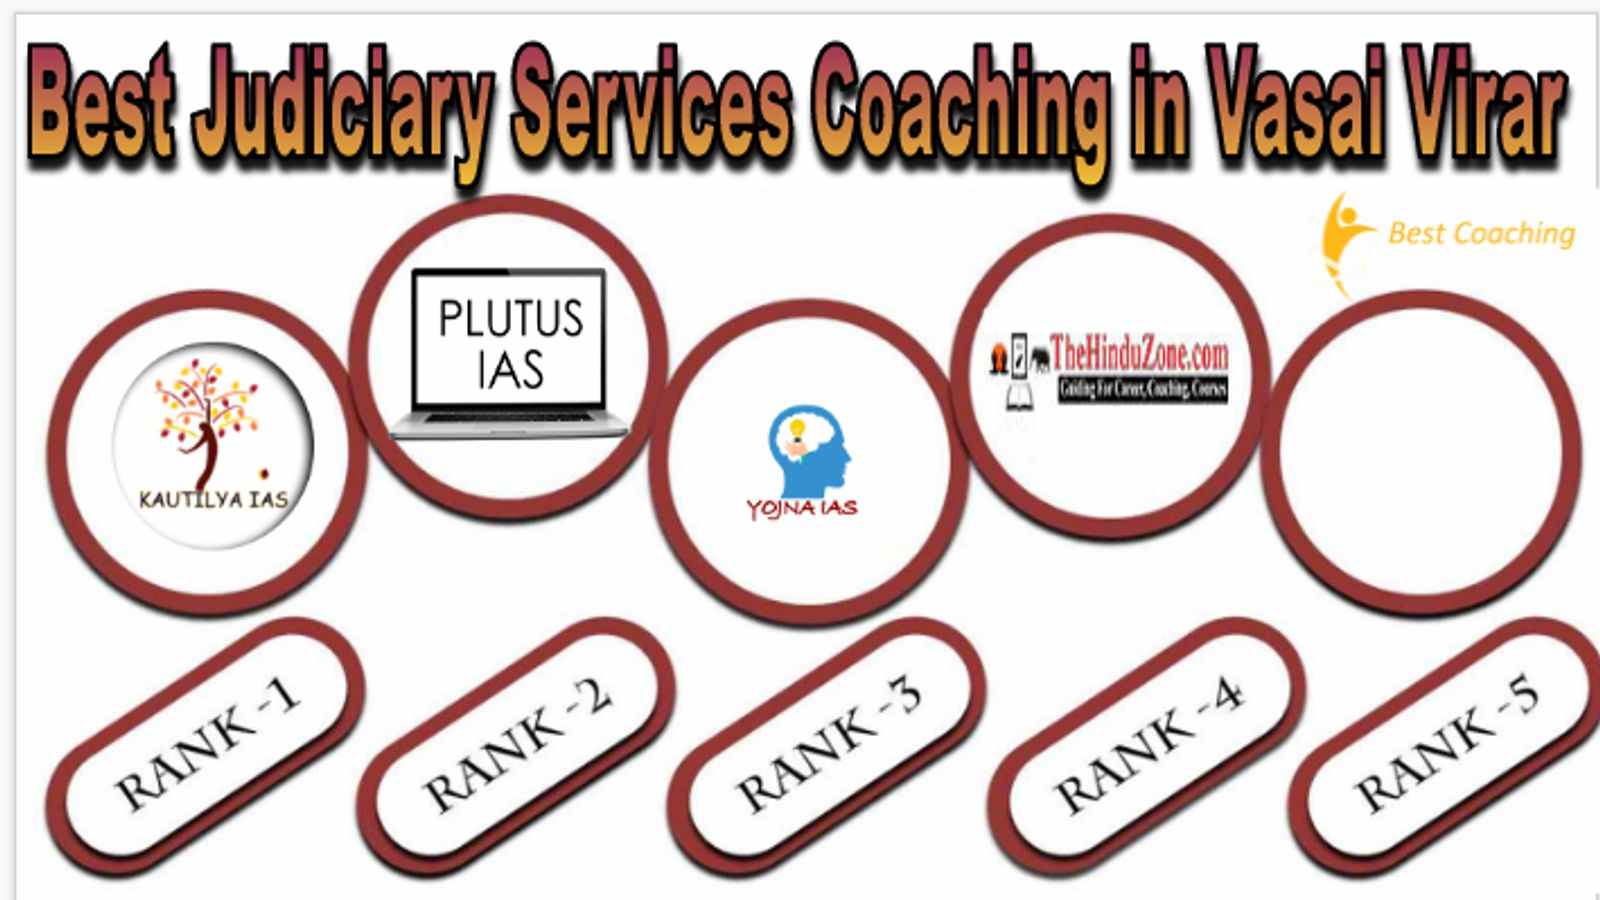 Best Judiciary Services Coaching in Vasai and Virar